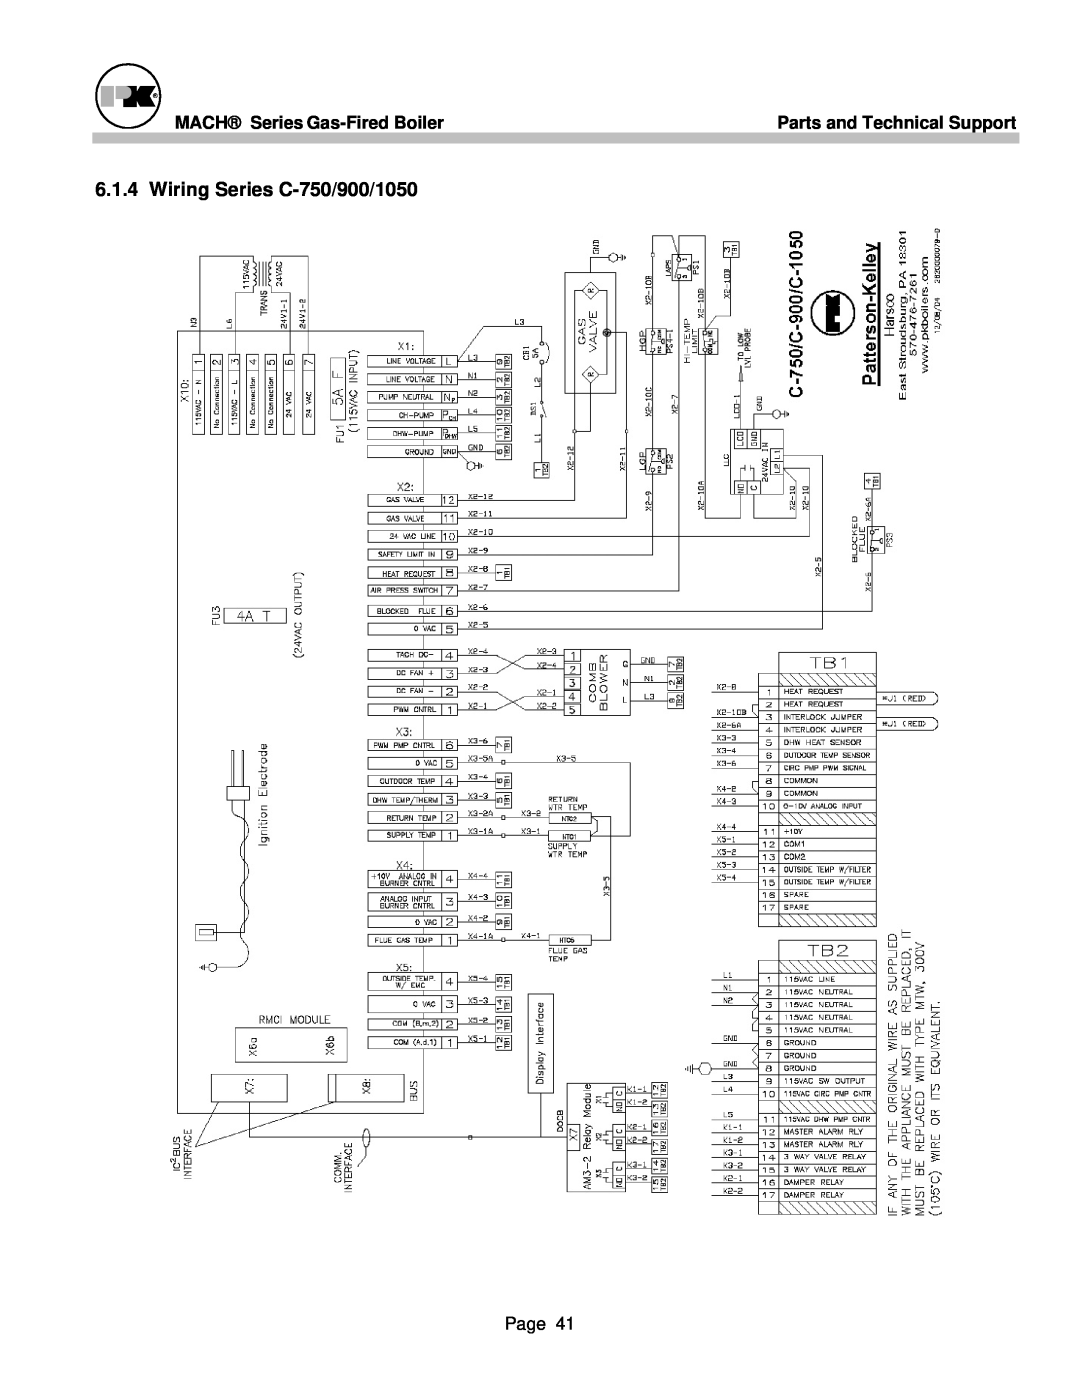 Patterson-Kelley MACH-05 manual Wiring Series C-750/900/1050, MACH Series Gas-FiredBoiler, Parts and Technical Support 